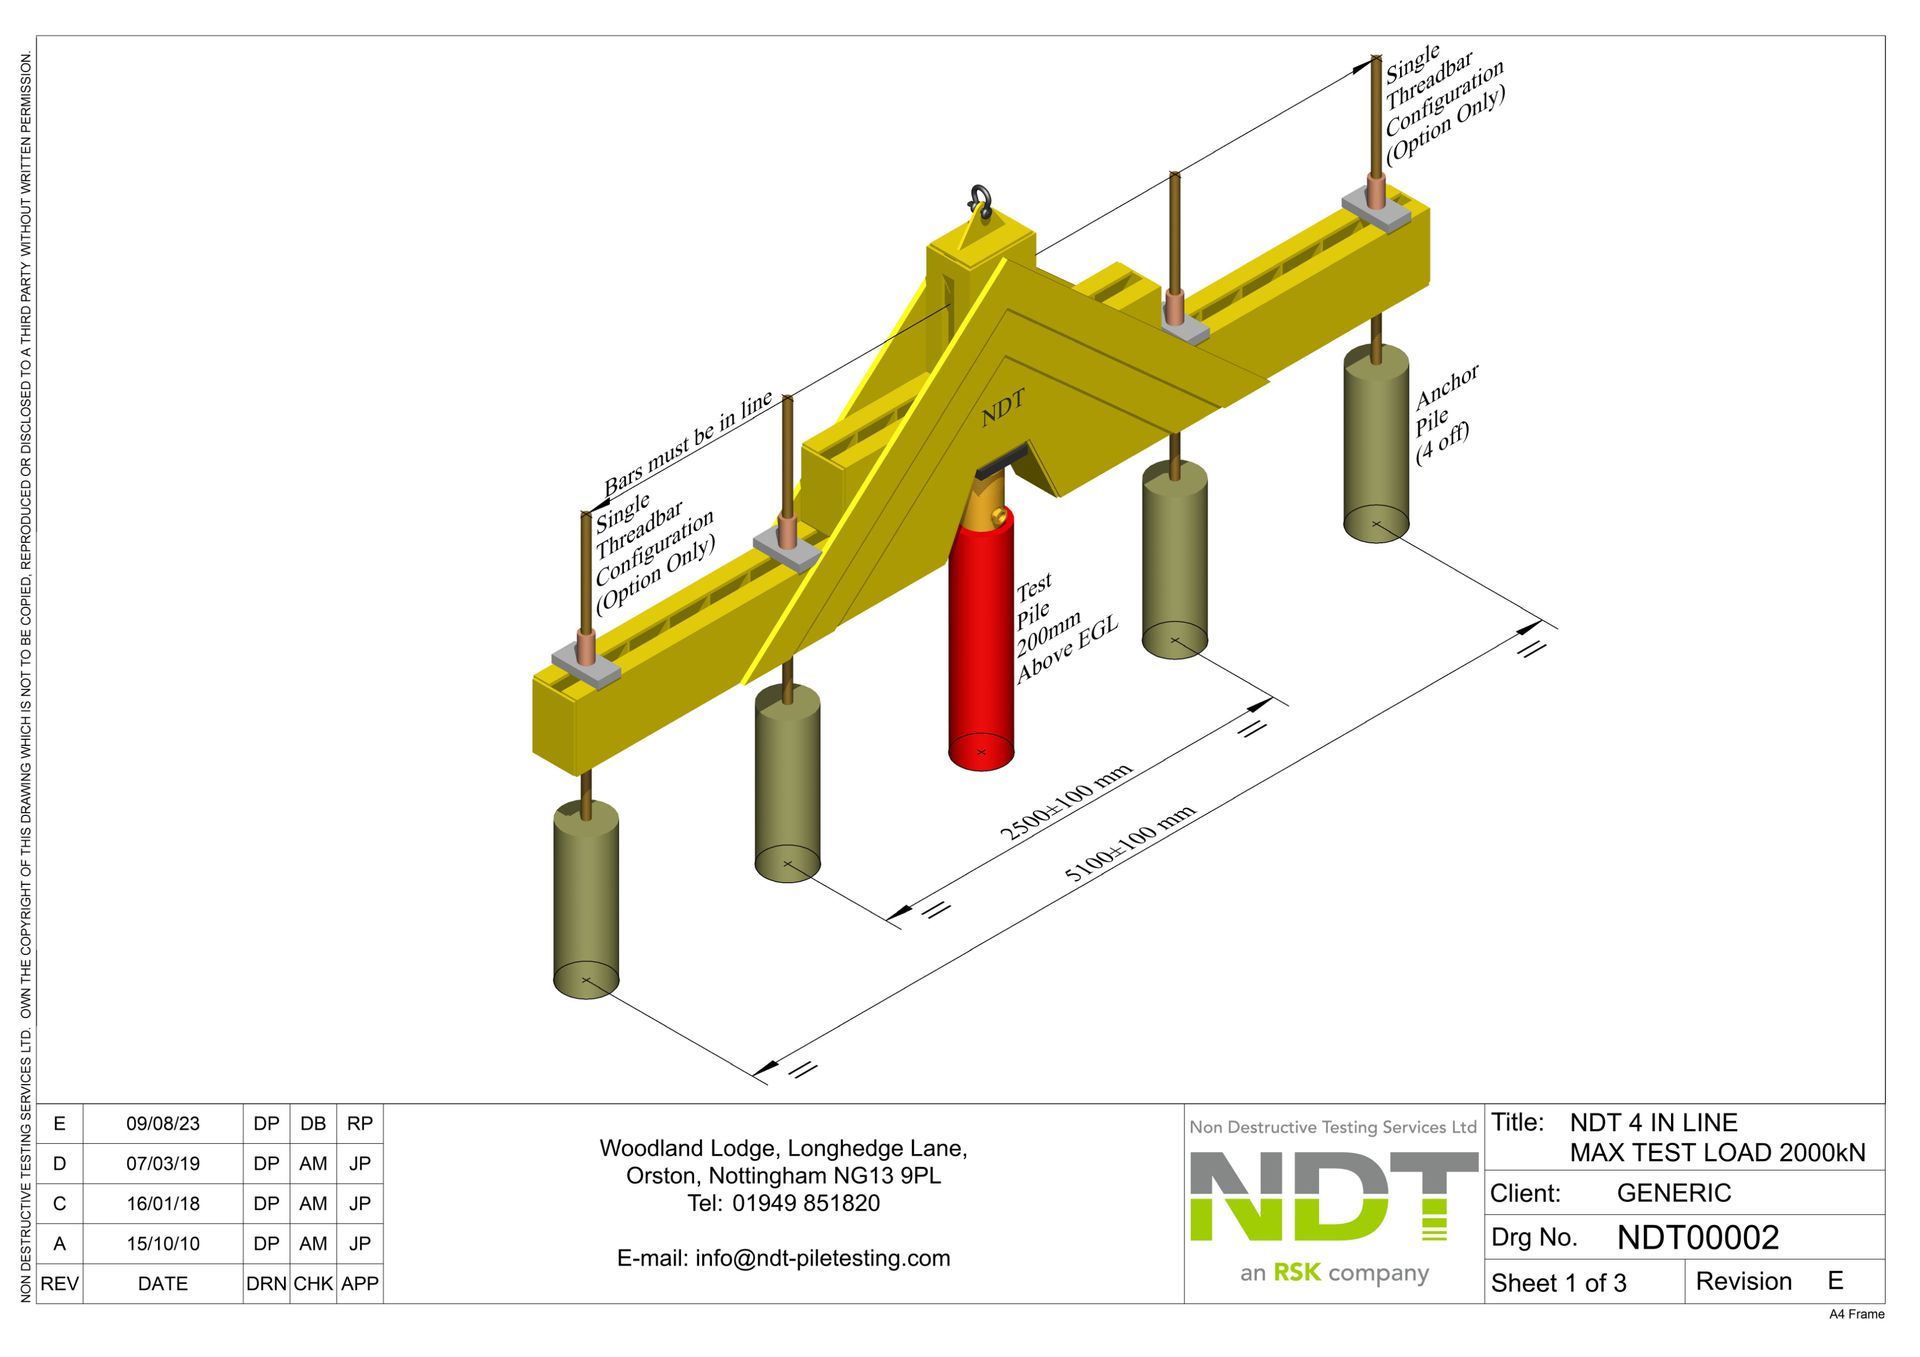 NDT00002 4 In-line Pile Layout (2000kN)